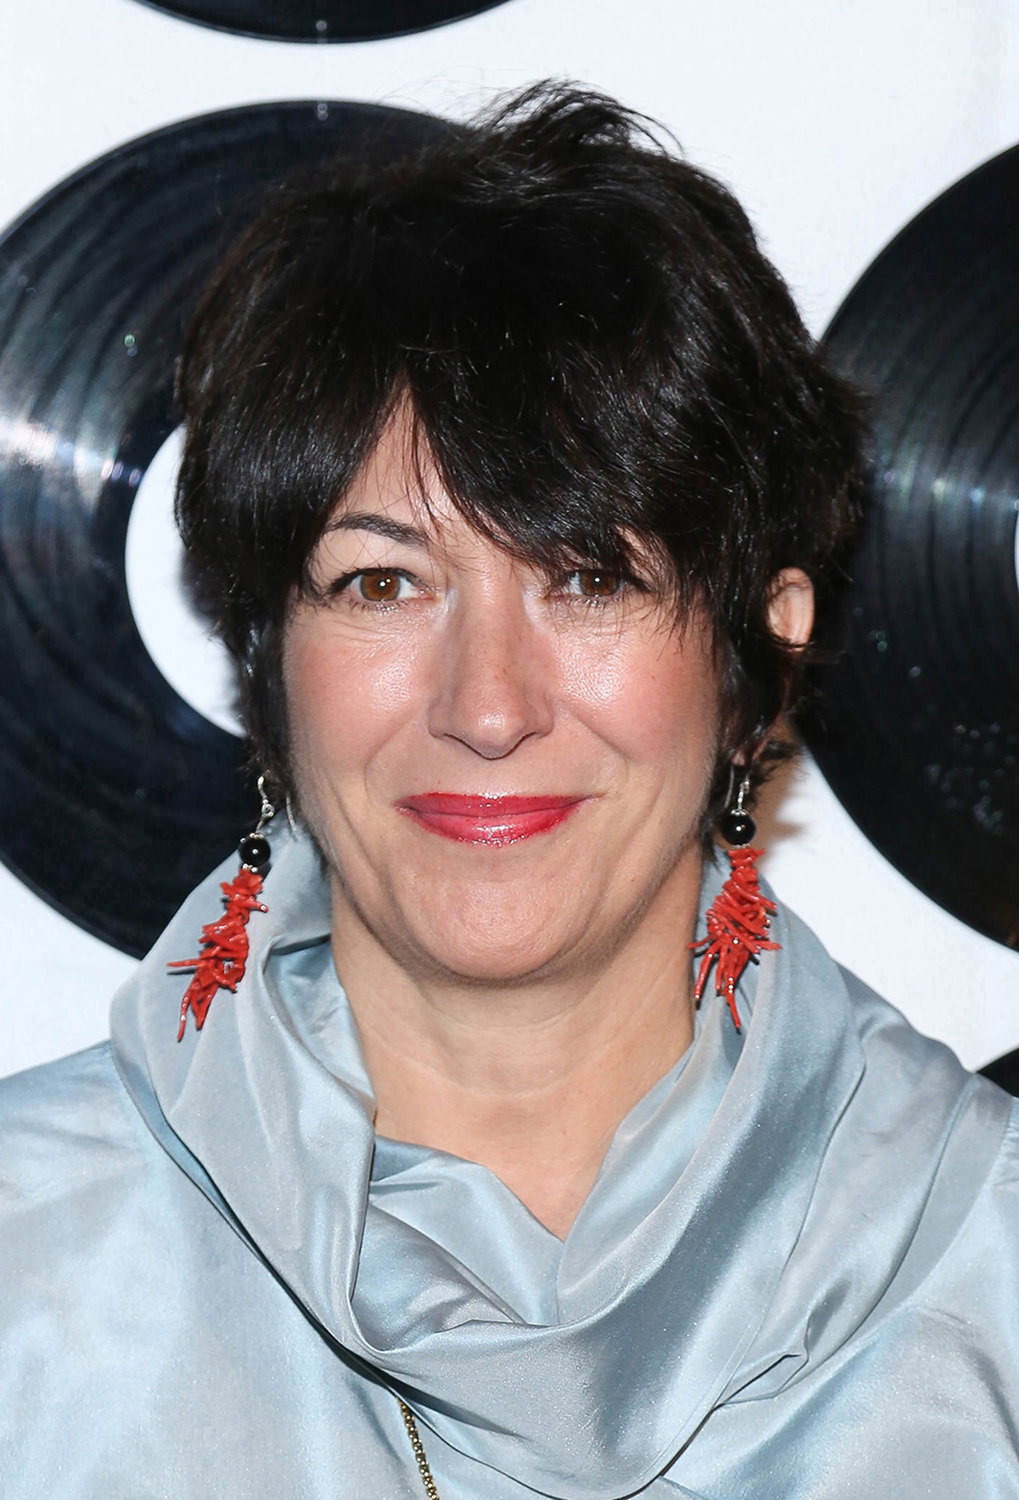 Ghislaine Maxwell attends a gala in New York in 2014. (Rob Kim/Getty Images/TNS)